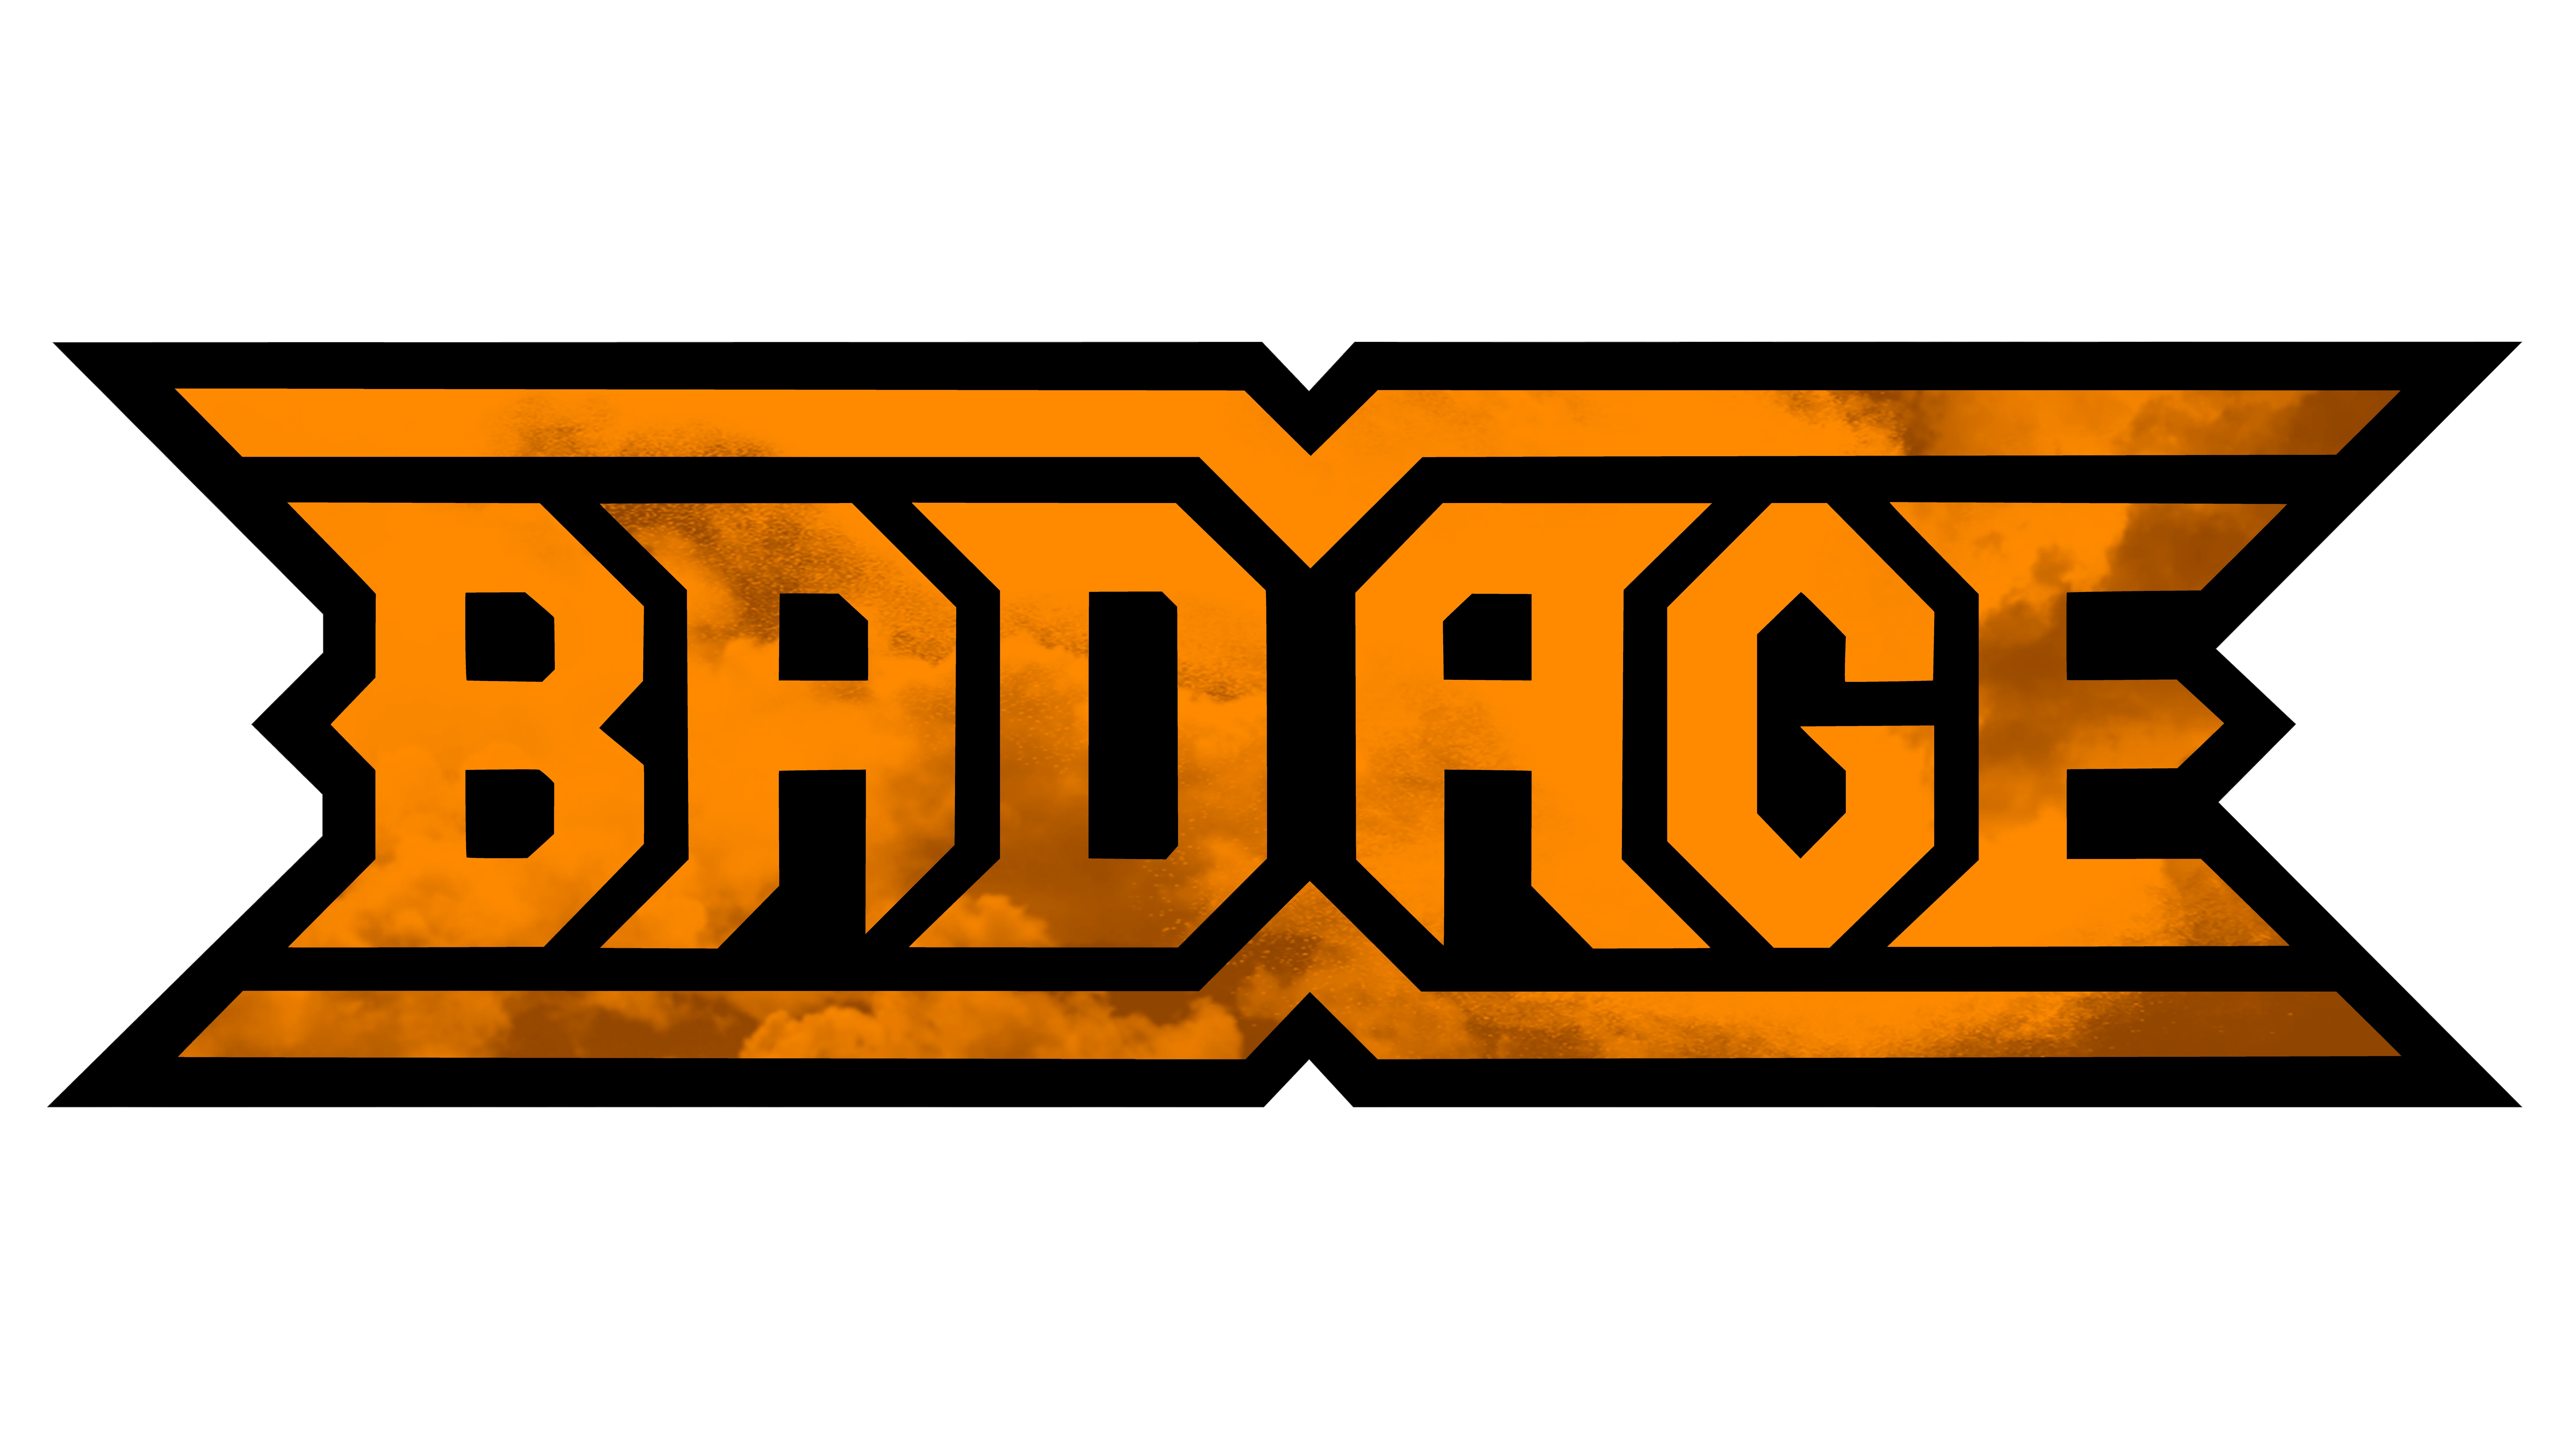 Bad Age band logo.
"Bad Age" in thick orange letters framed at the top and bottom by a thick orange line that points downwards and upwards between the two words.
Black background and white border. In the orange you can see hints of smoke.